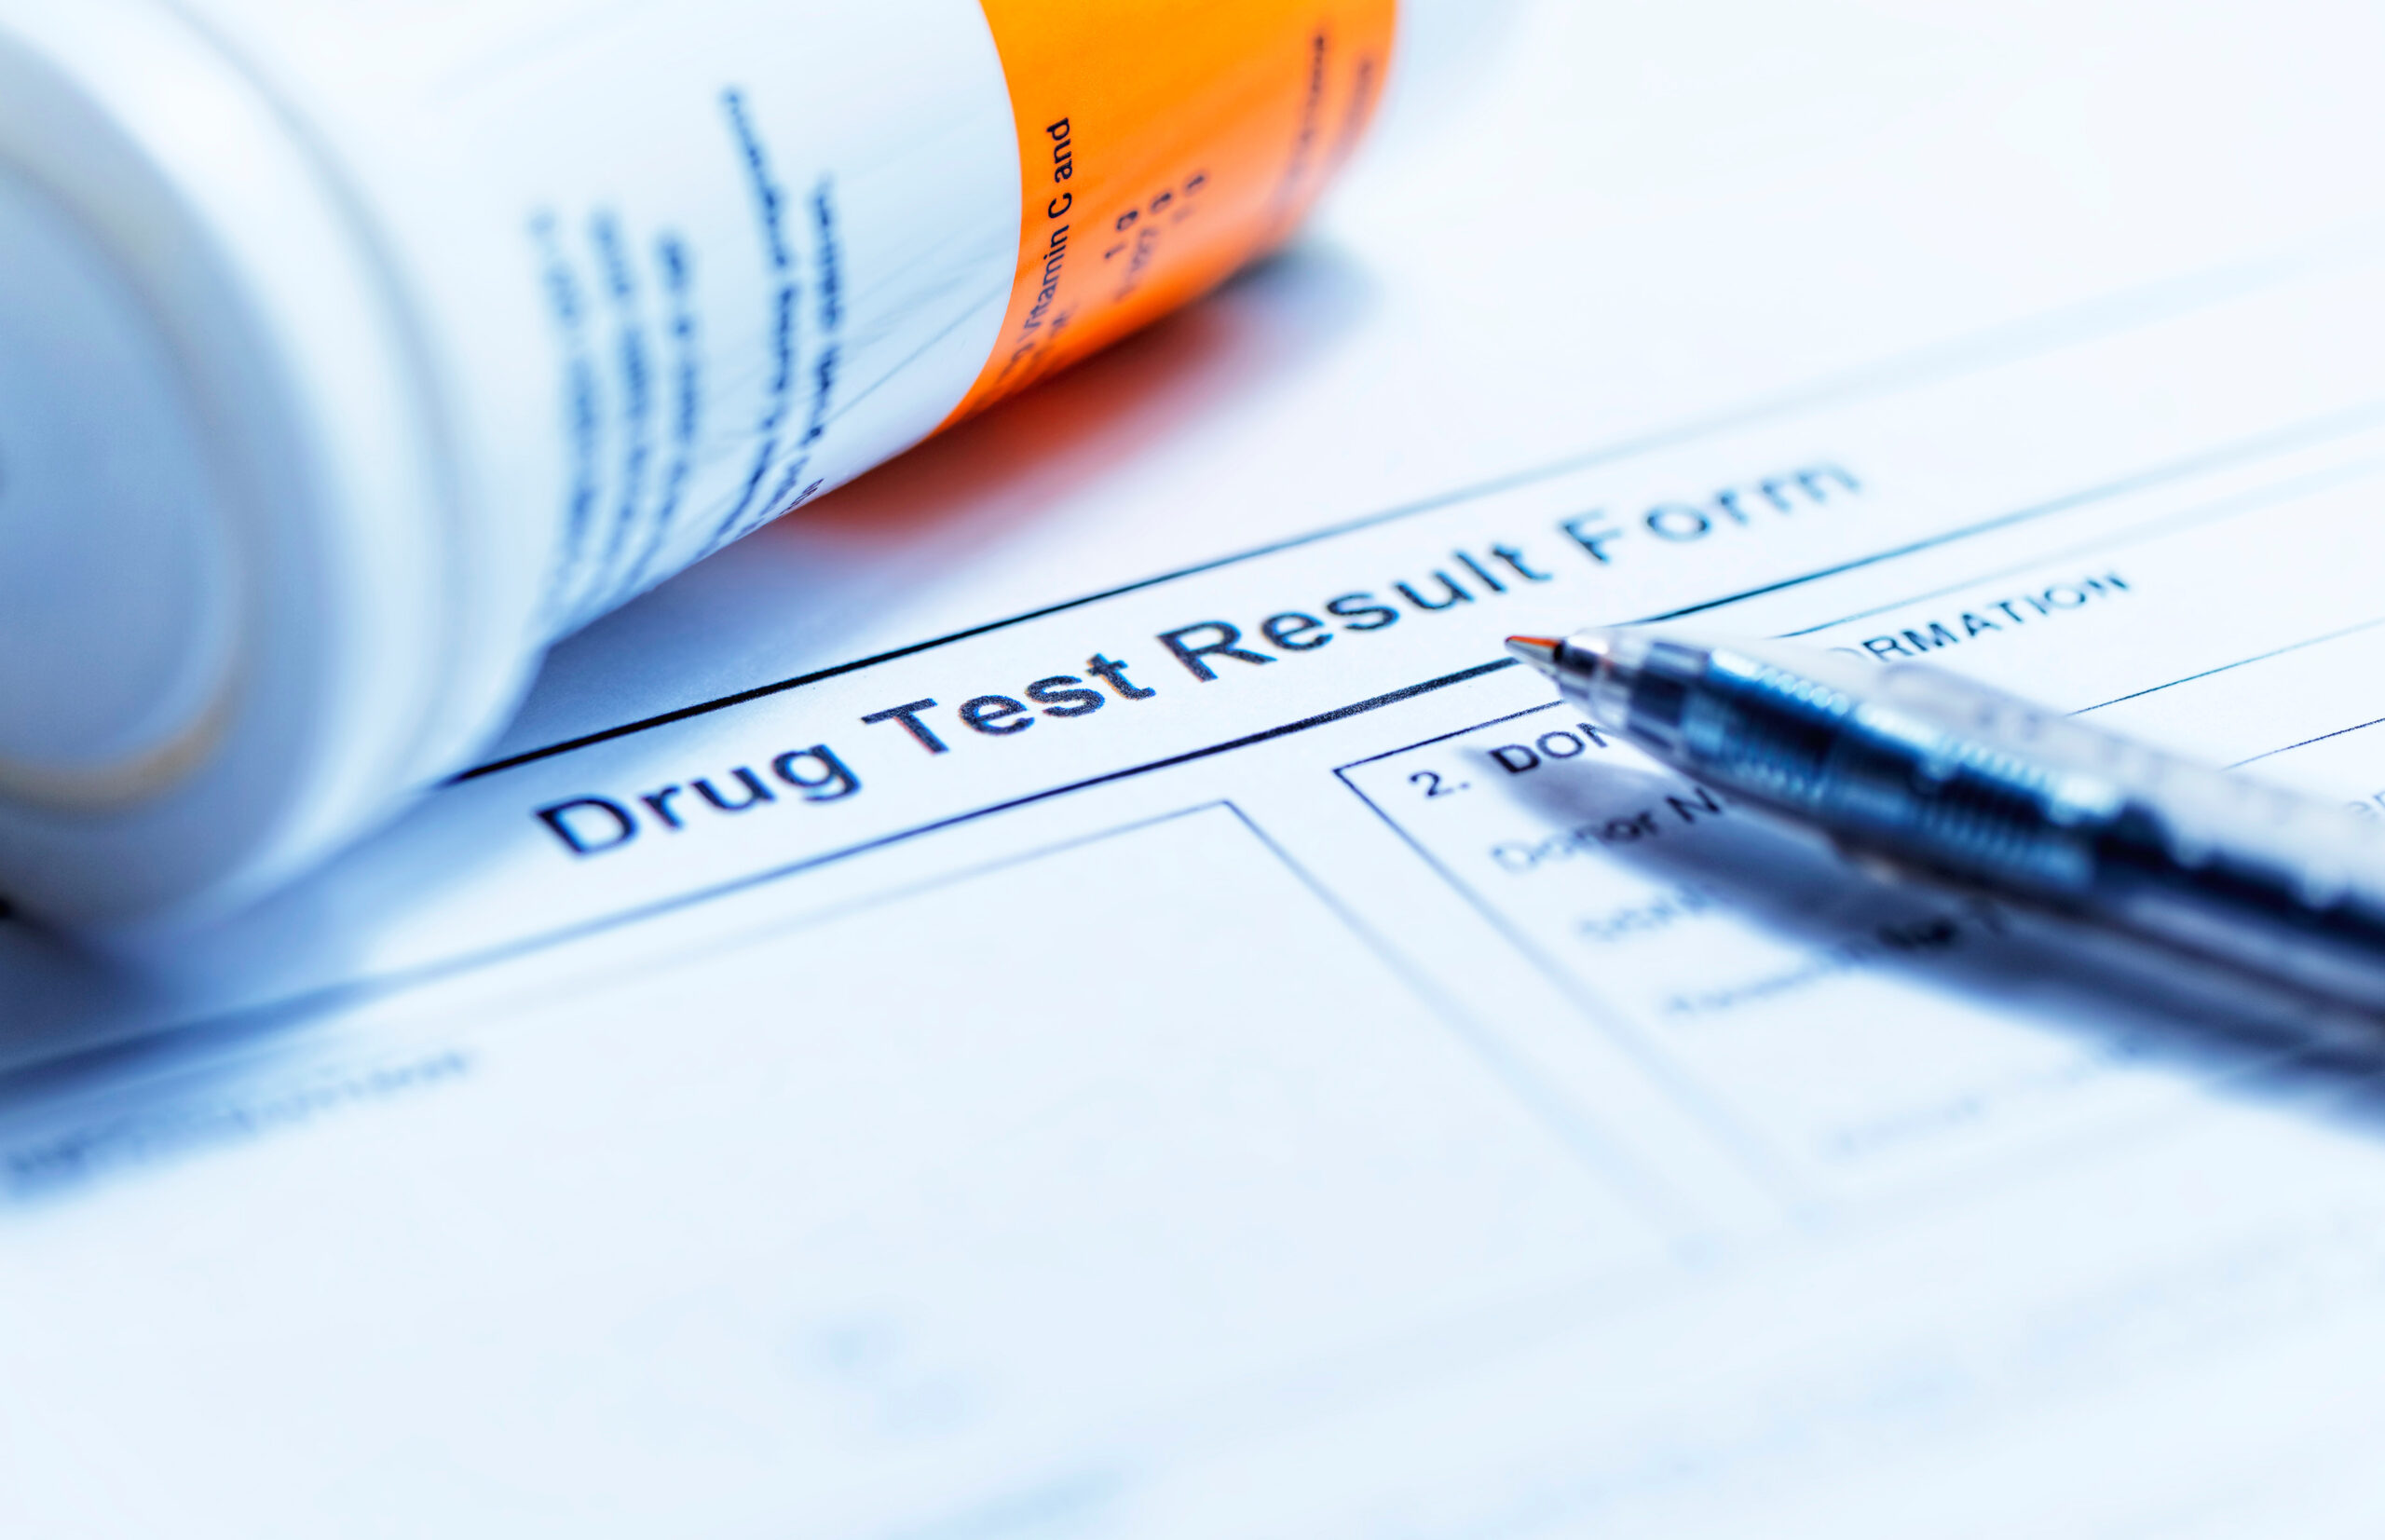 Why Choose About My Health for Hair Follicle Drug testing in Brockton, MA?